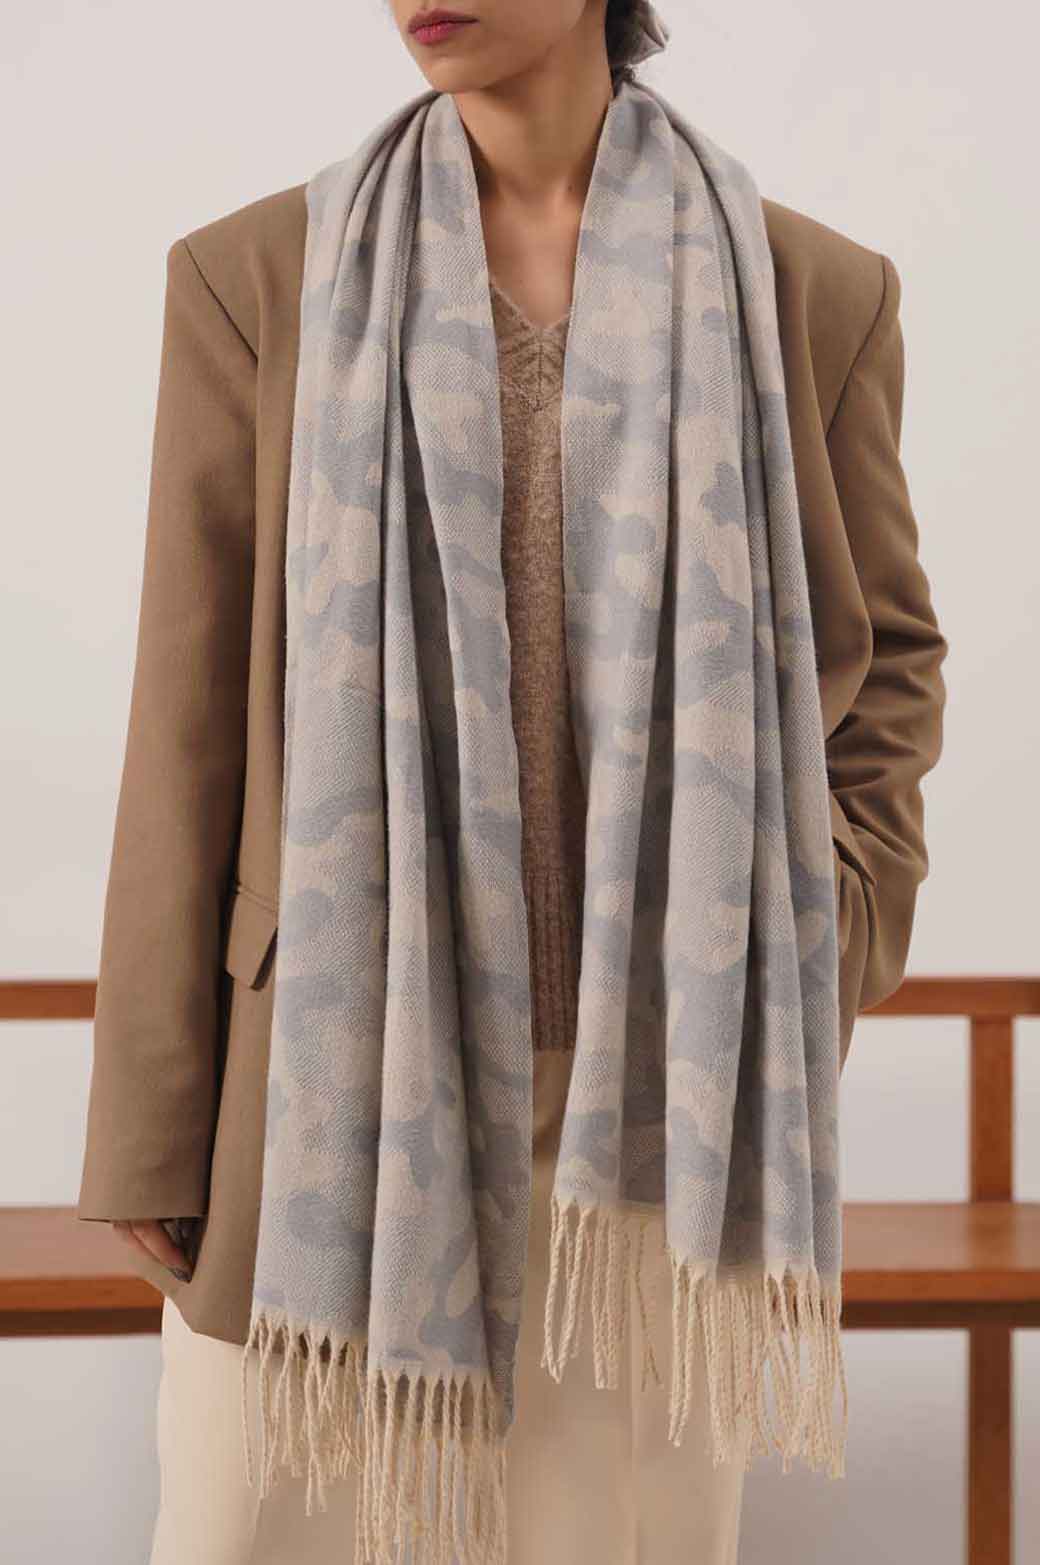 GREY CAMOUFLAGE WINTER SCARF